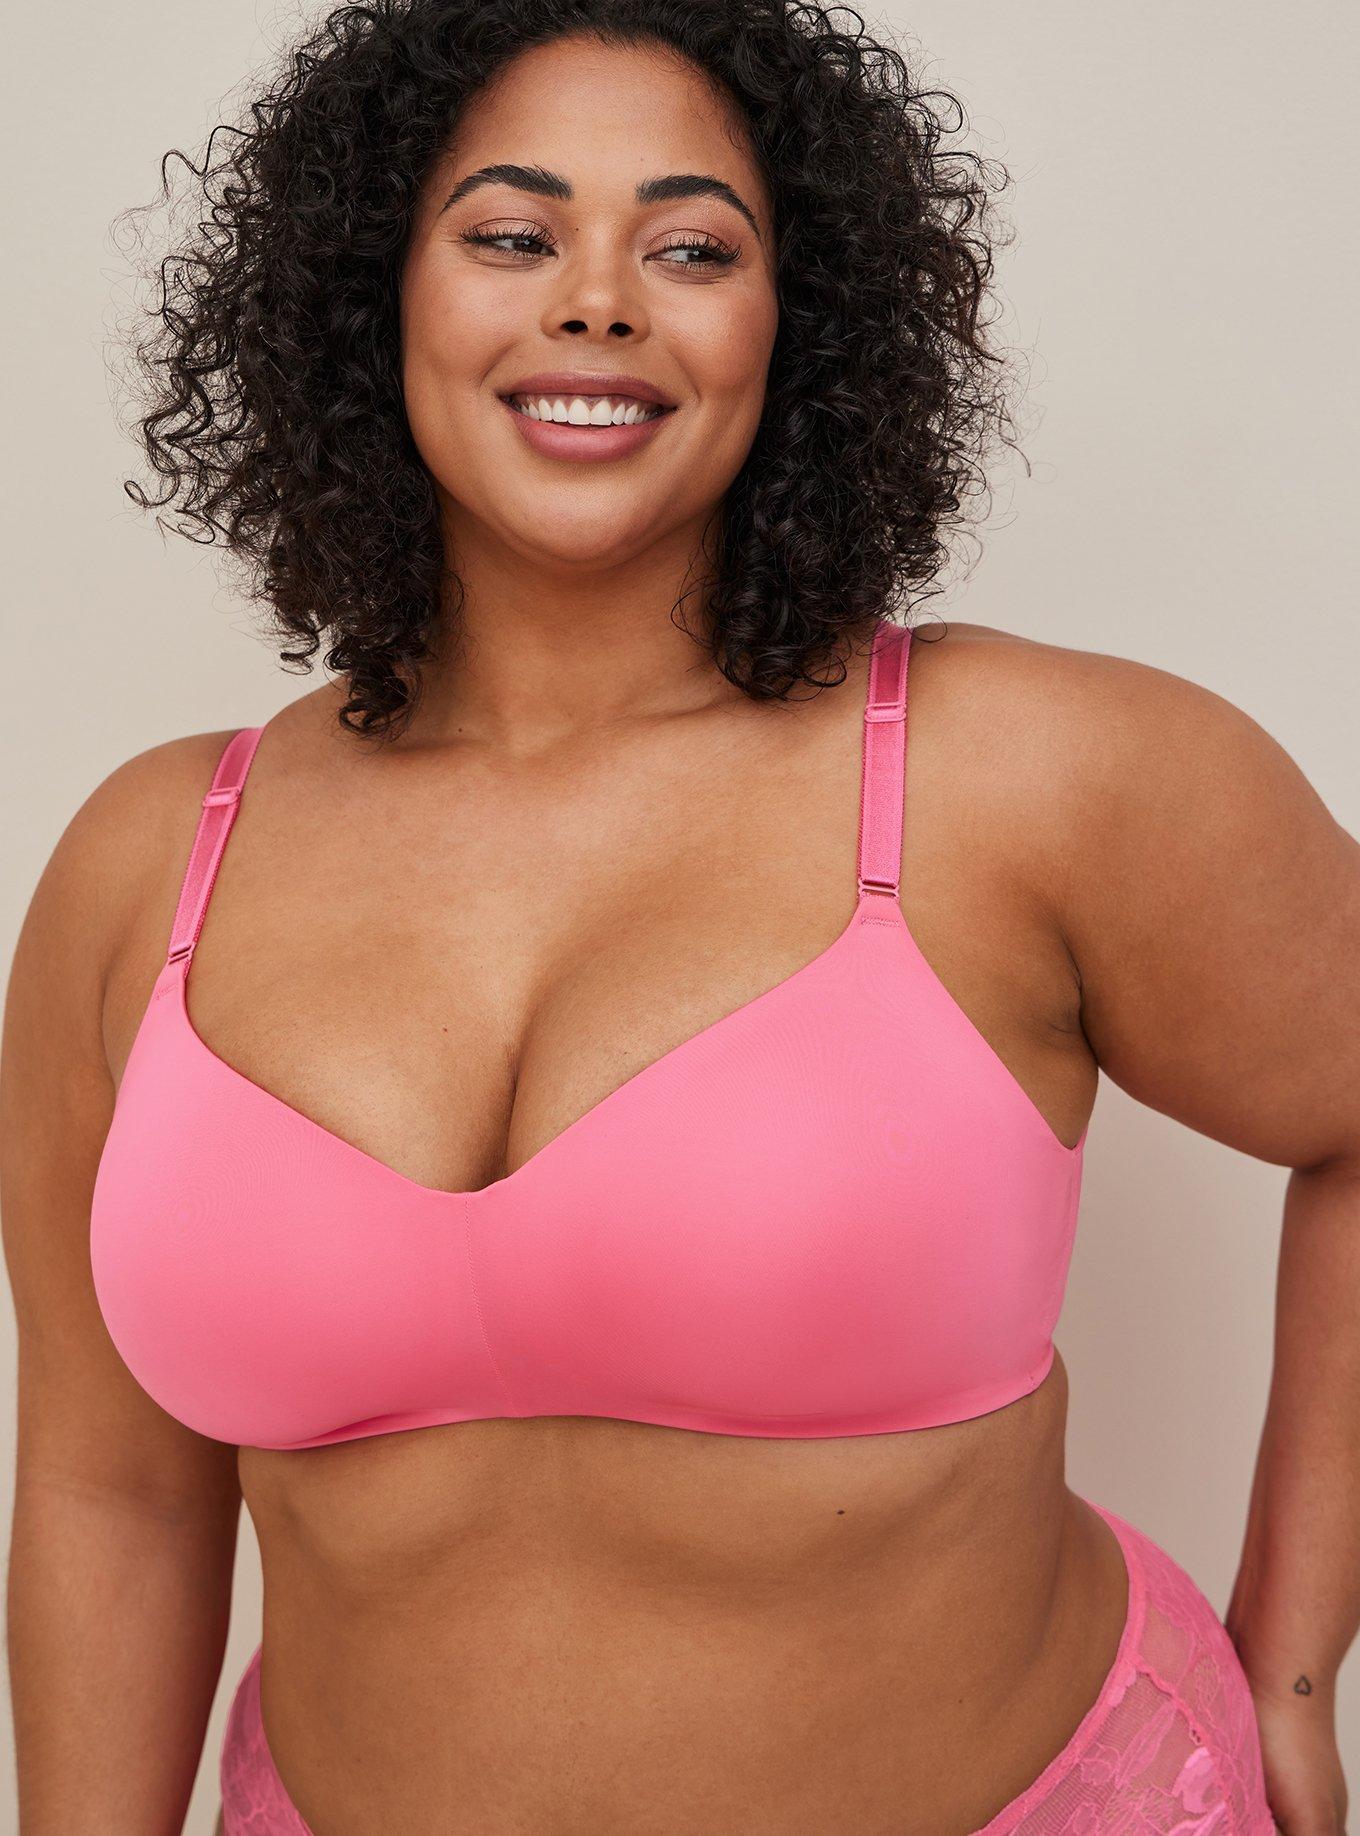 The Iowa Mom Who Designed The Perfect Sports Bra - Oh My! Omaha